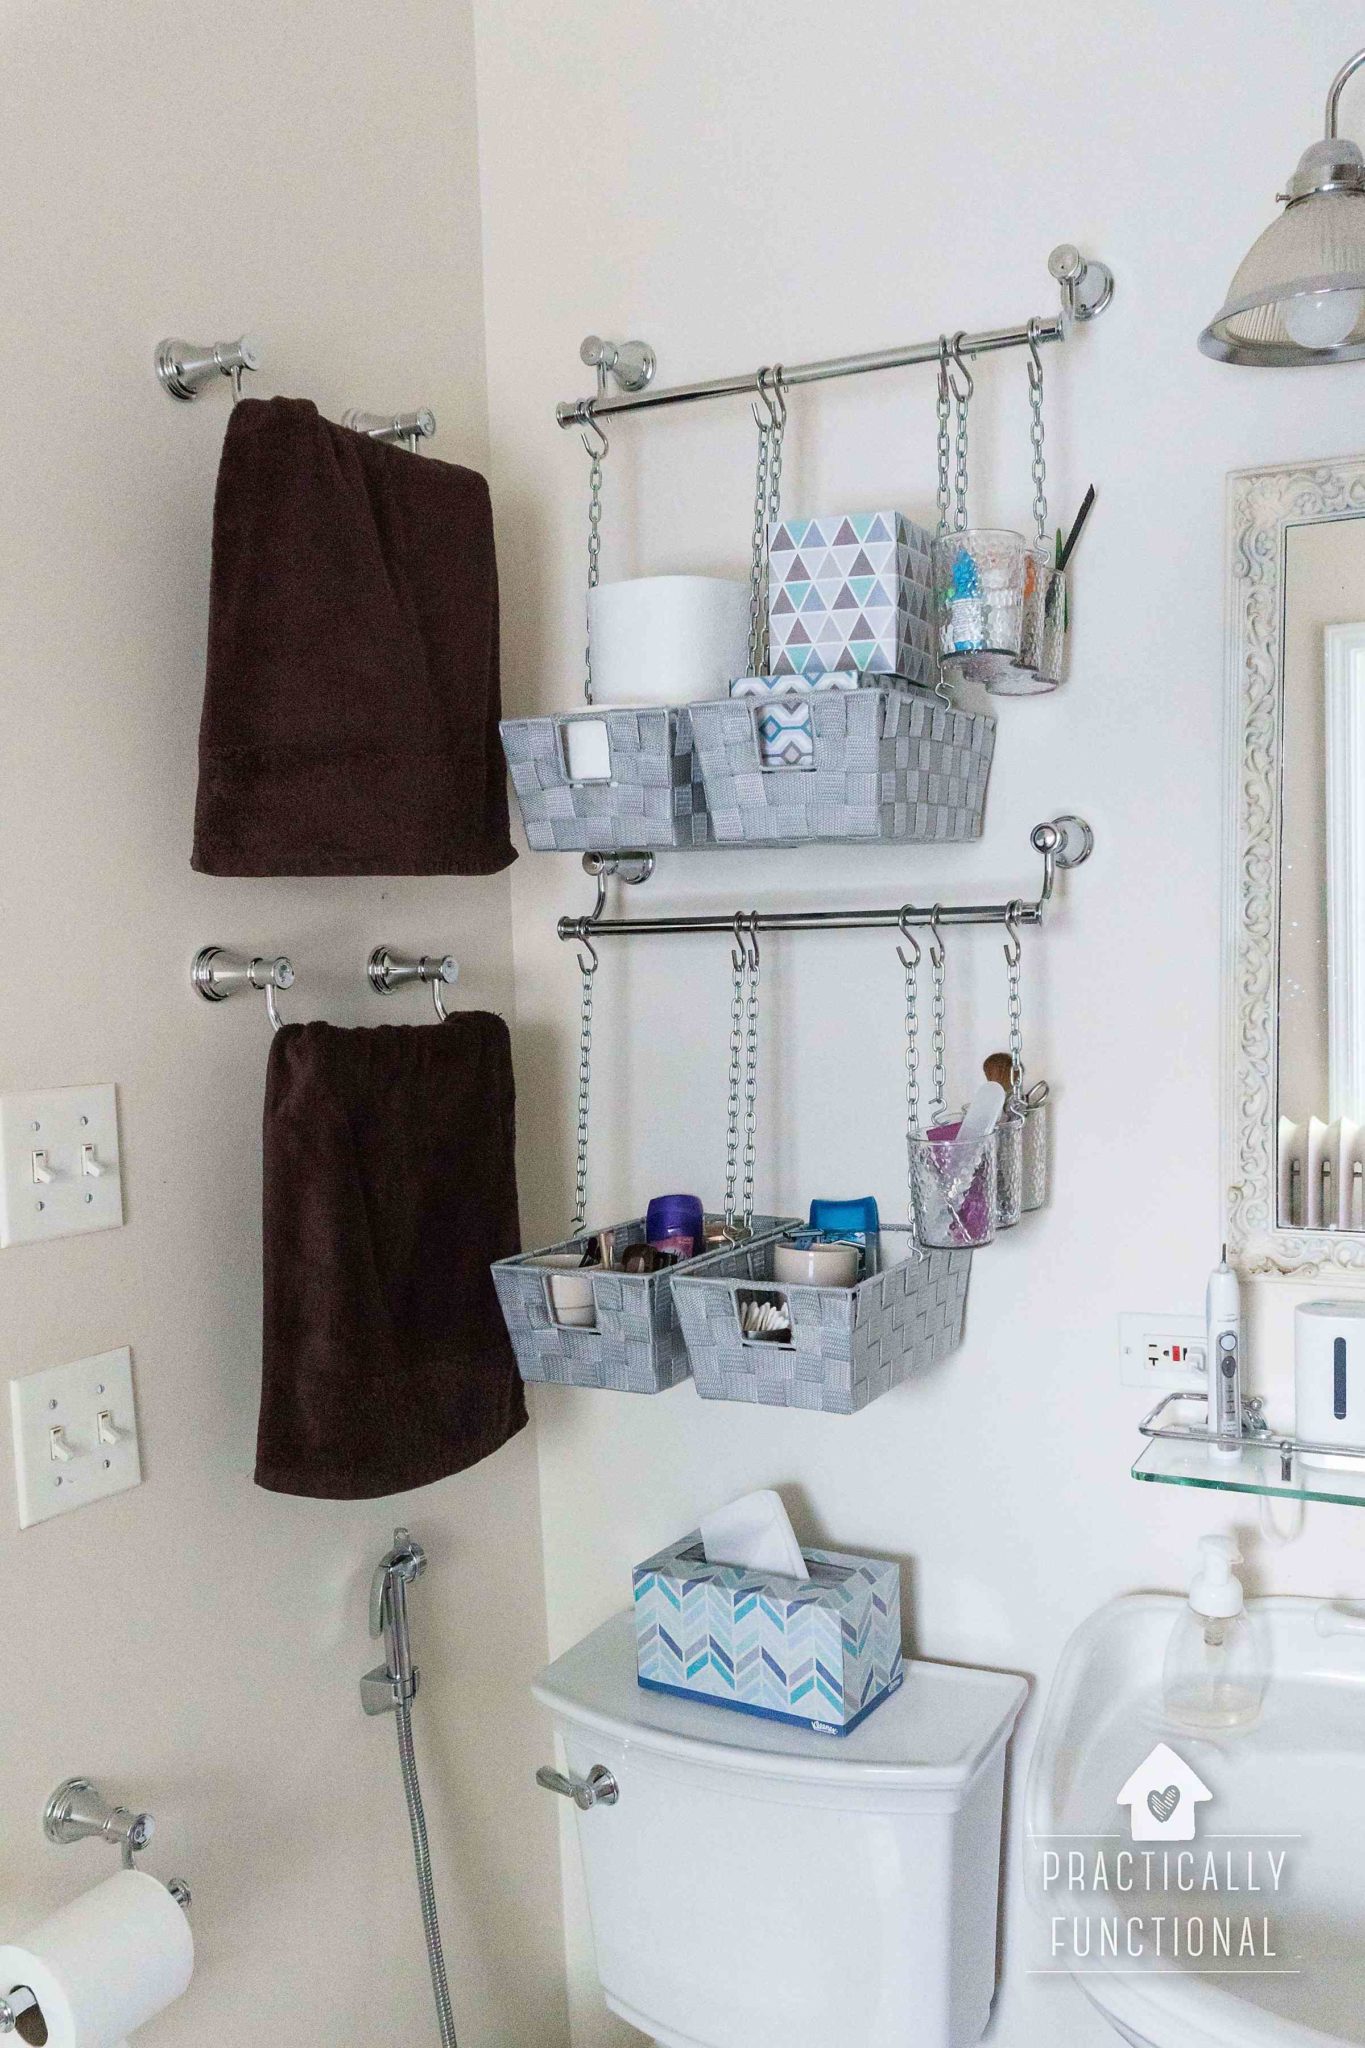 https://www.practicallyfunctional.com/wp-content/uploads/2017/06/DIY-Hanging-Storage-Bins-For-Over-The-Toilet-Storage-Moen-Practically-Functional-2.jpg